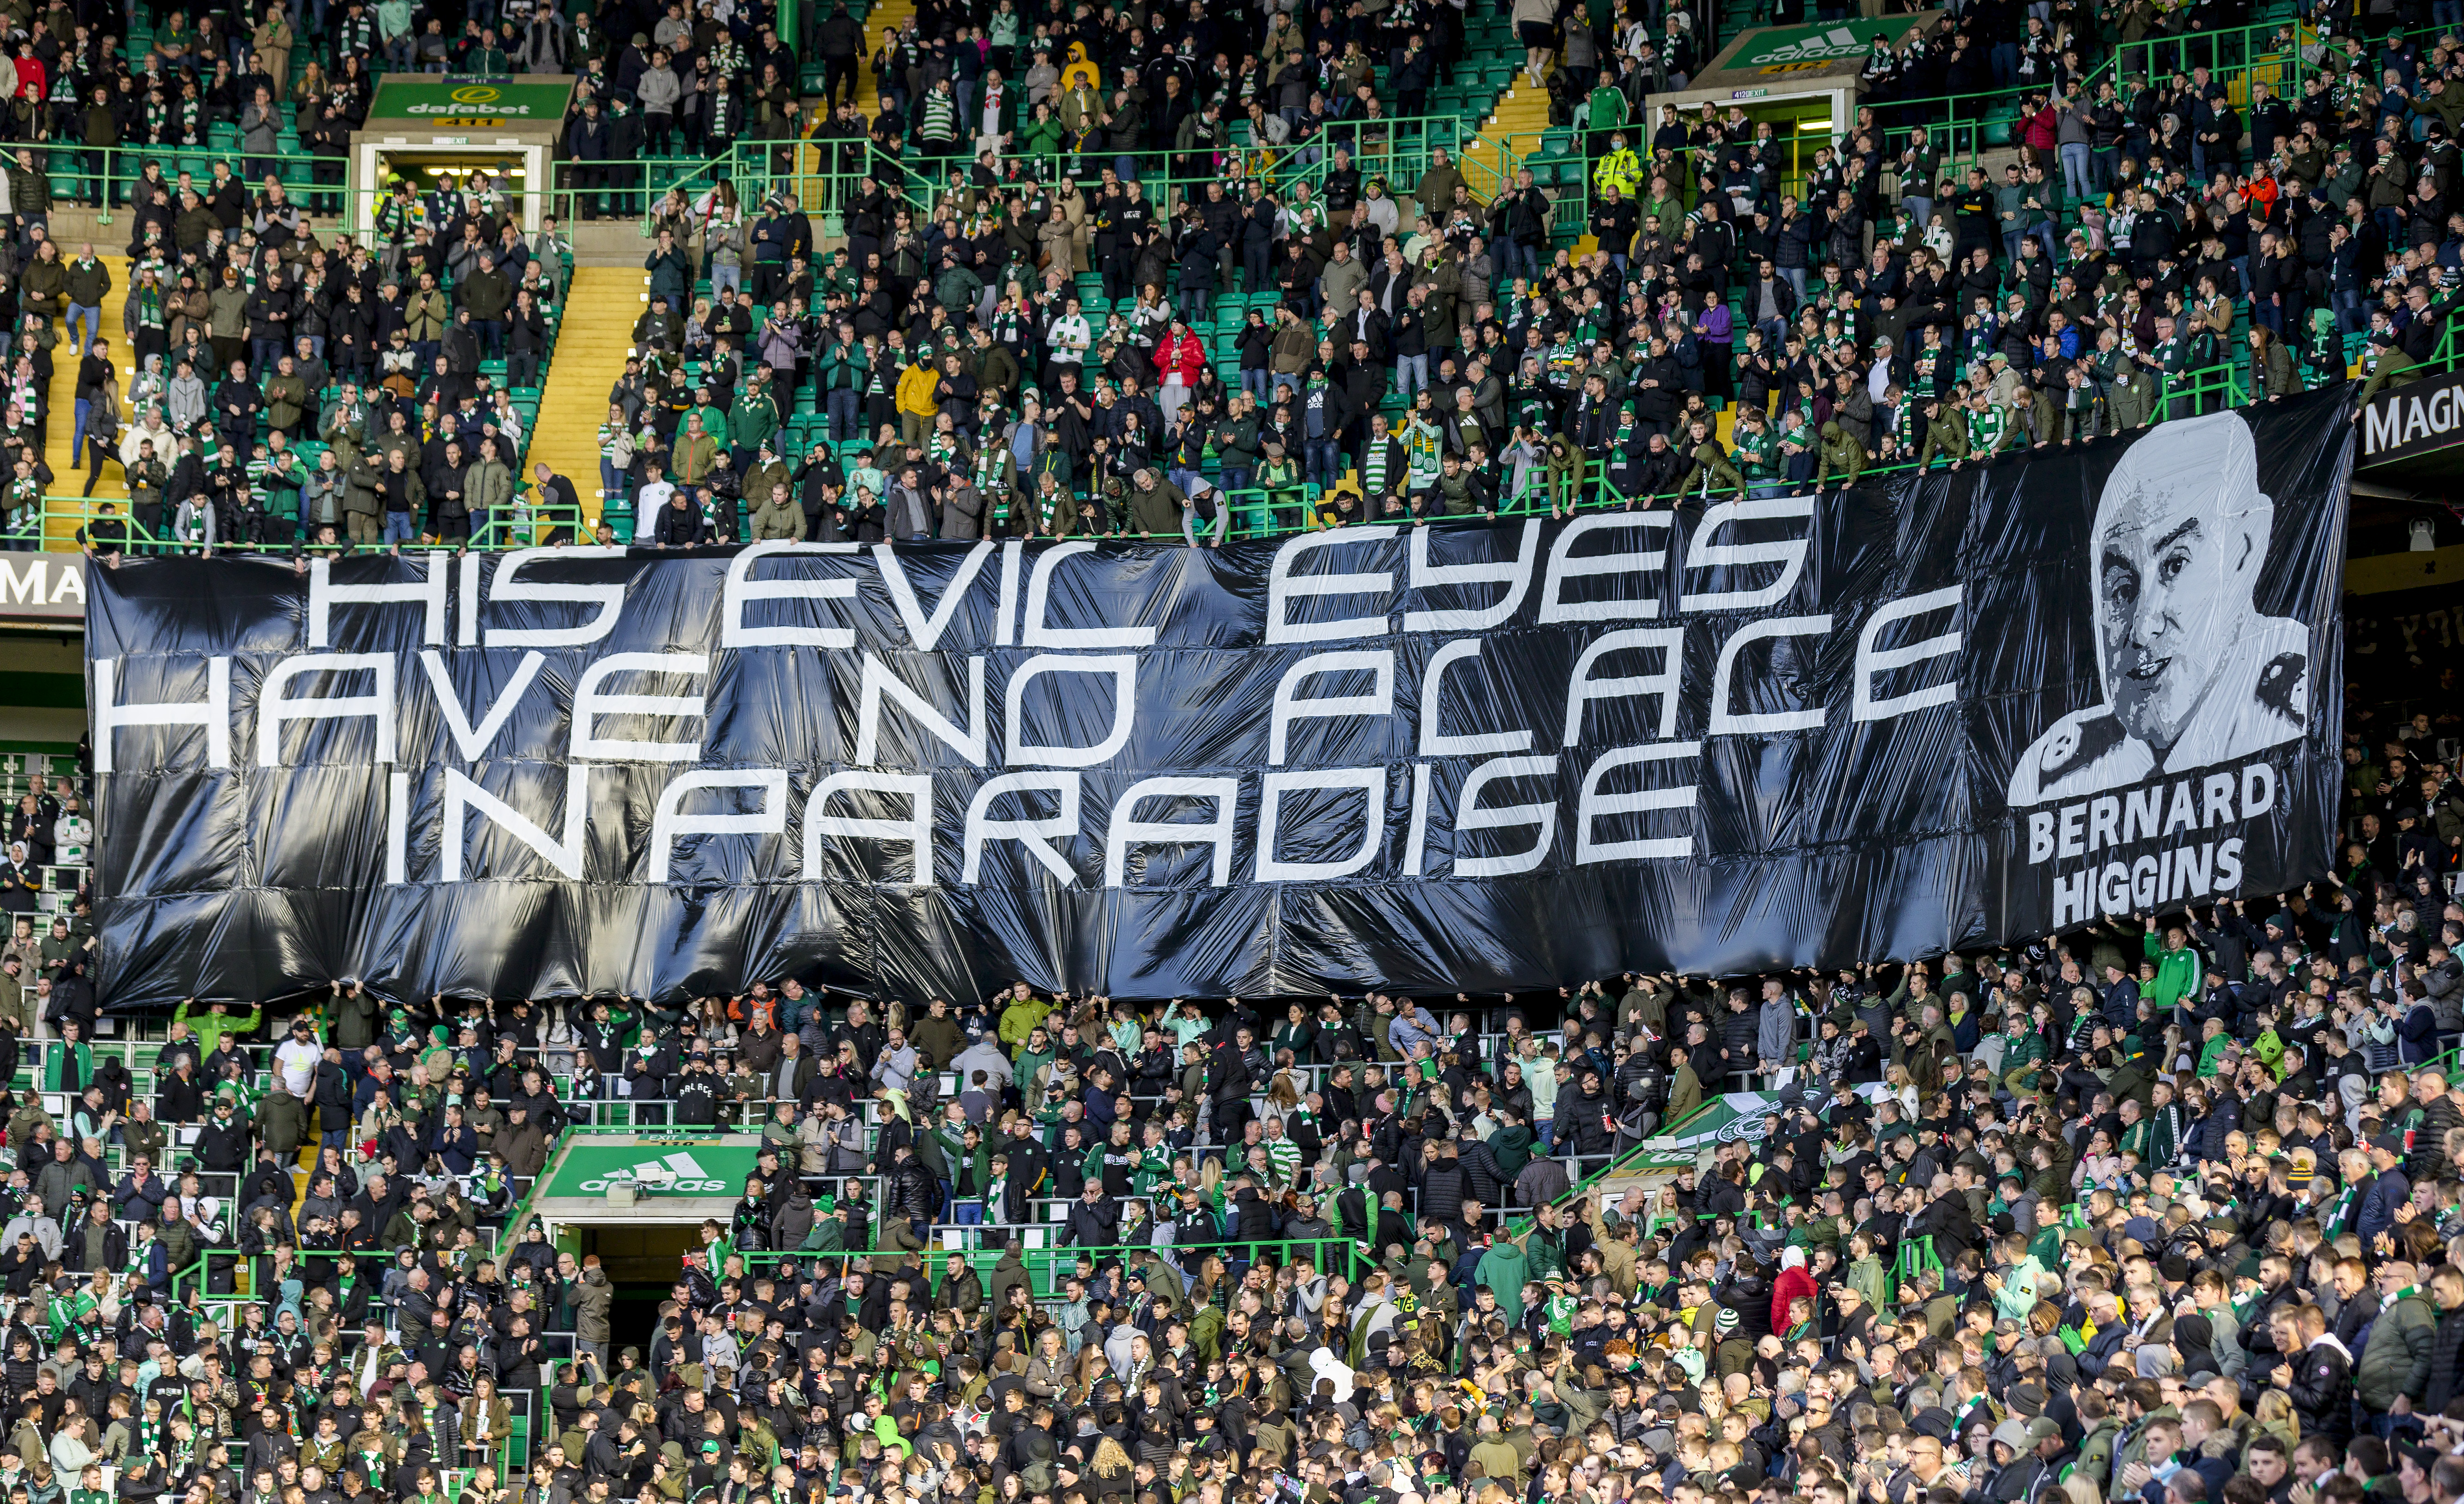 Celtic fans unfurl banners and stage silent protest as cop chief Bernard Higgins linked to Hoops security role. The Scottish Sun